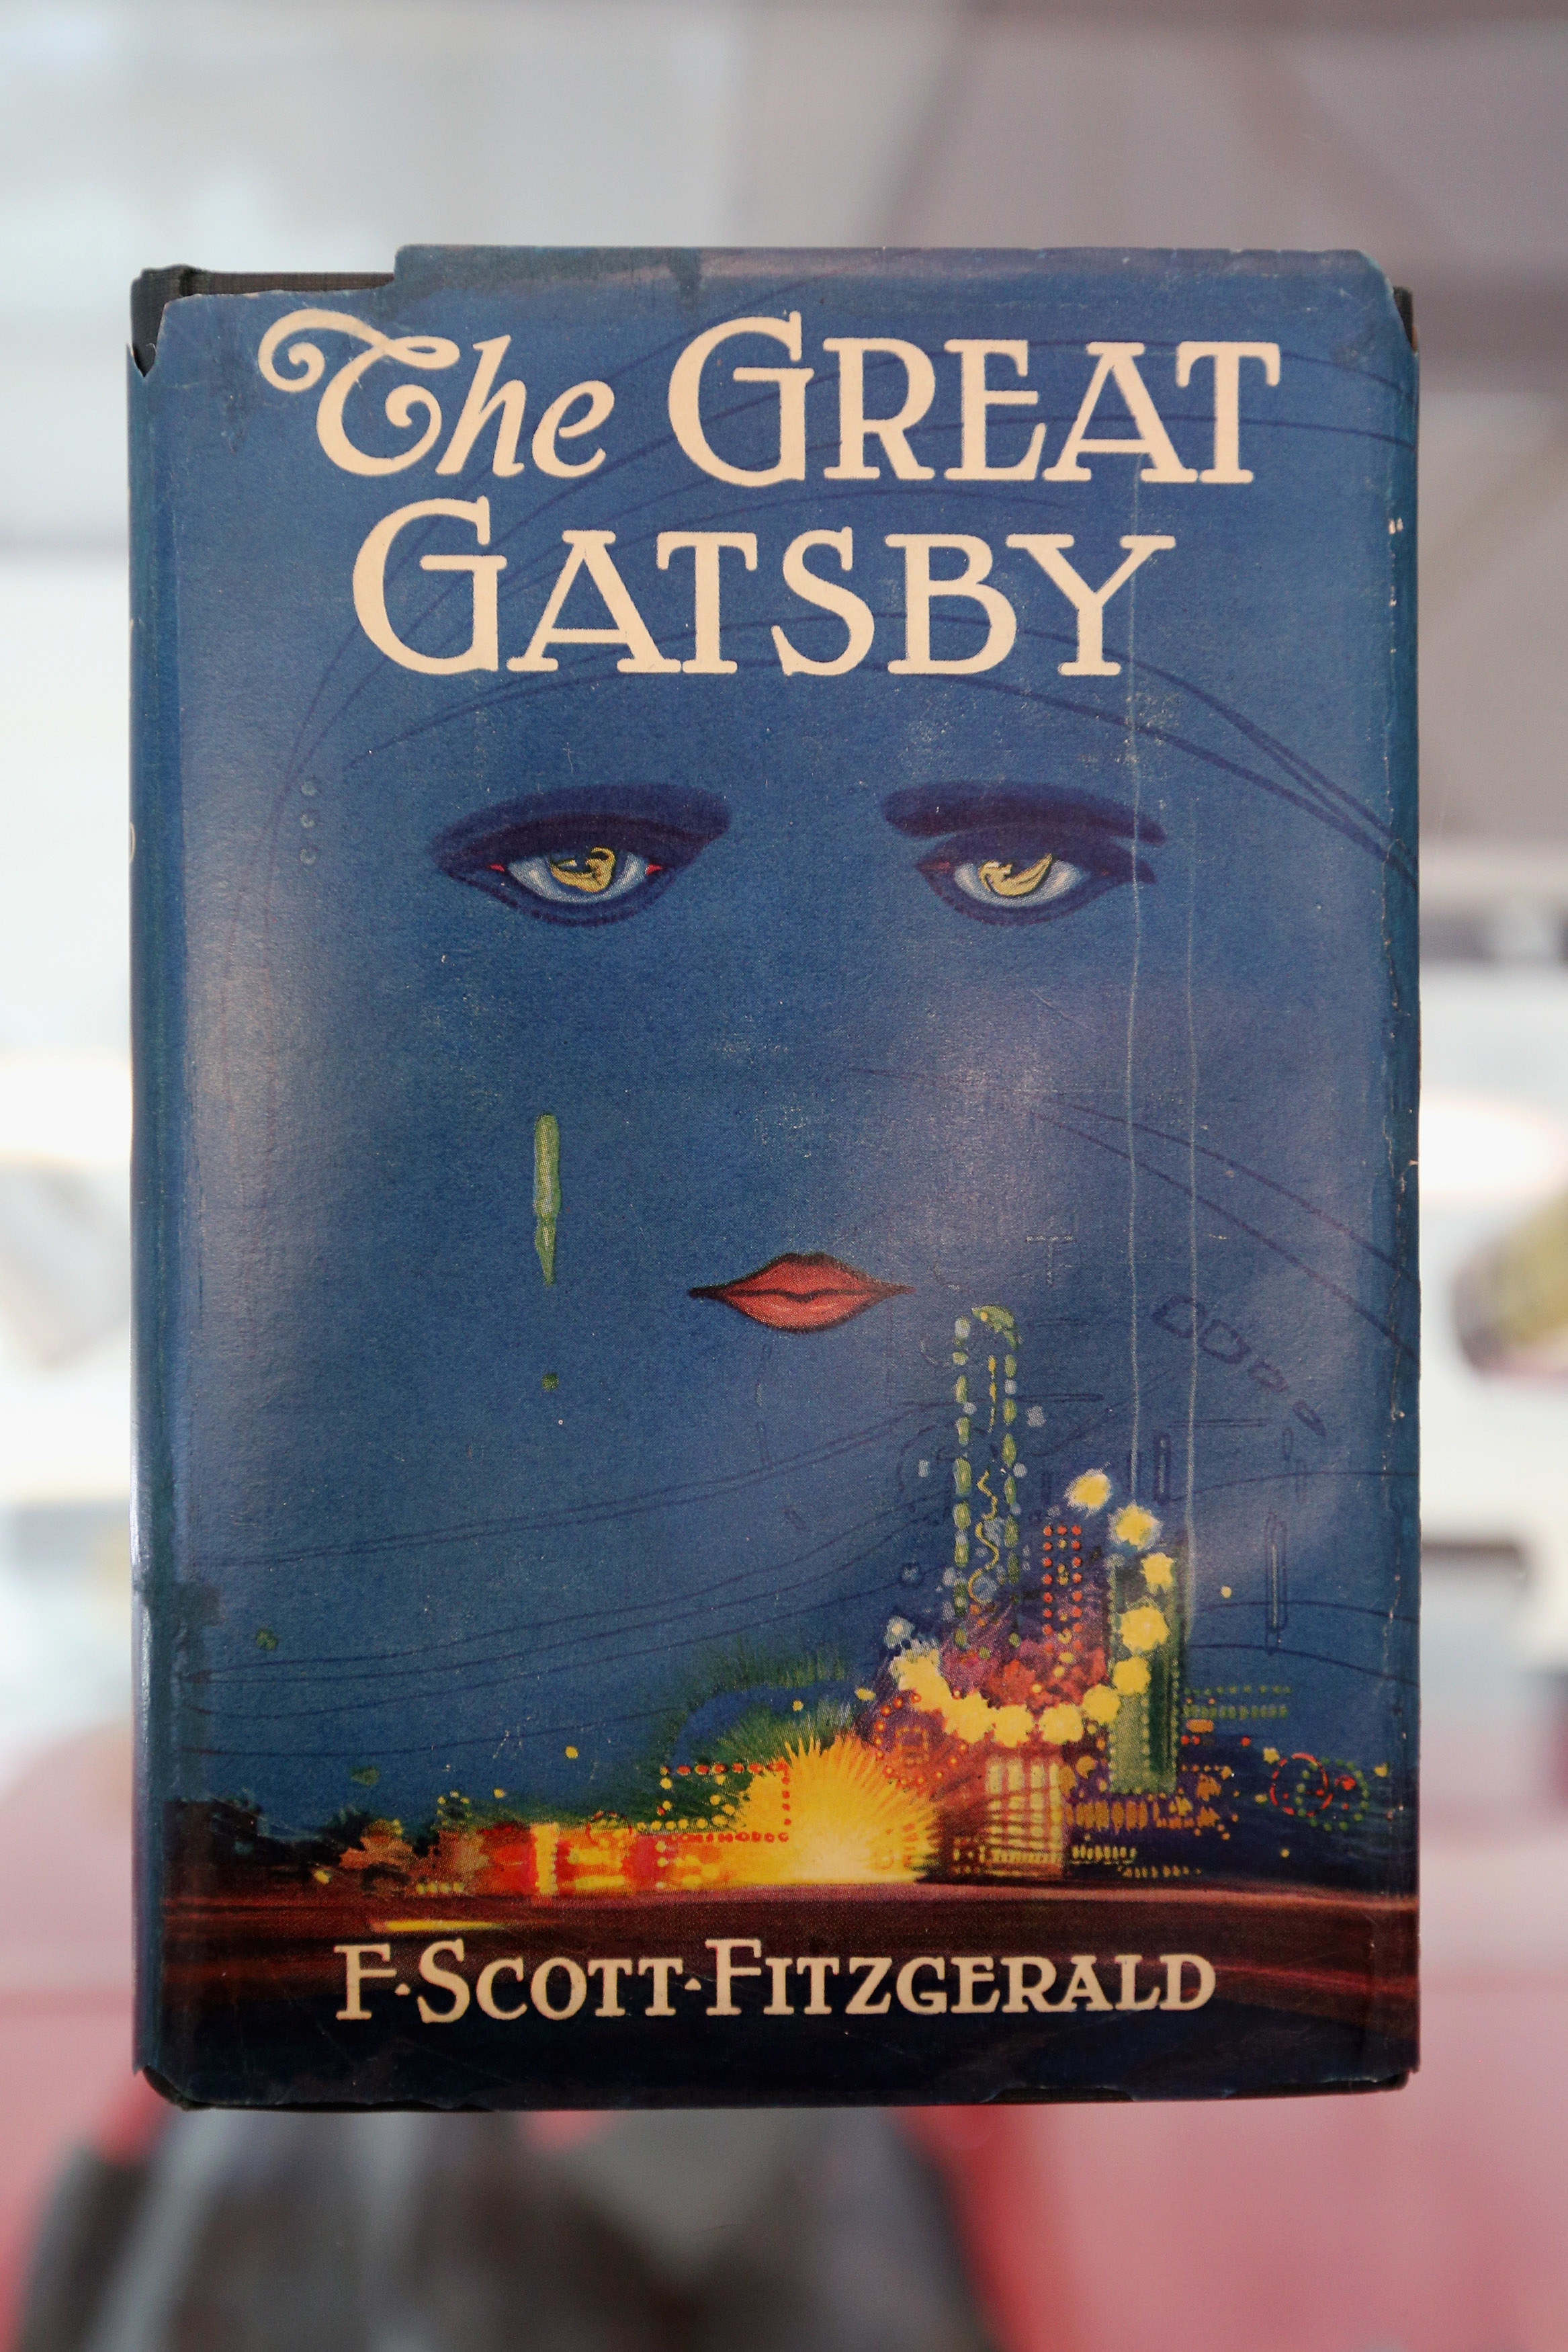 The cover of the novel The Great Gatsby